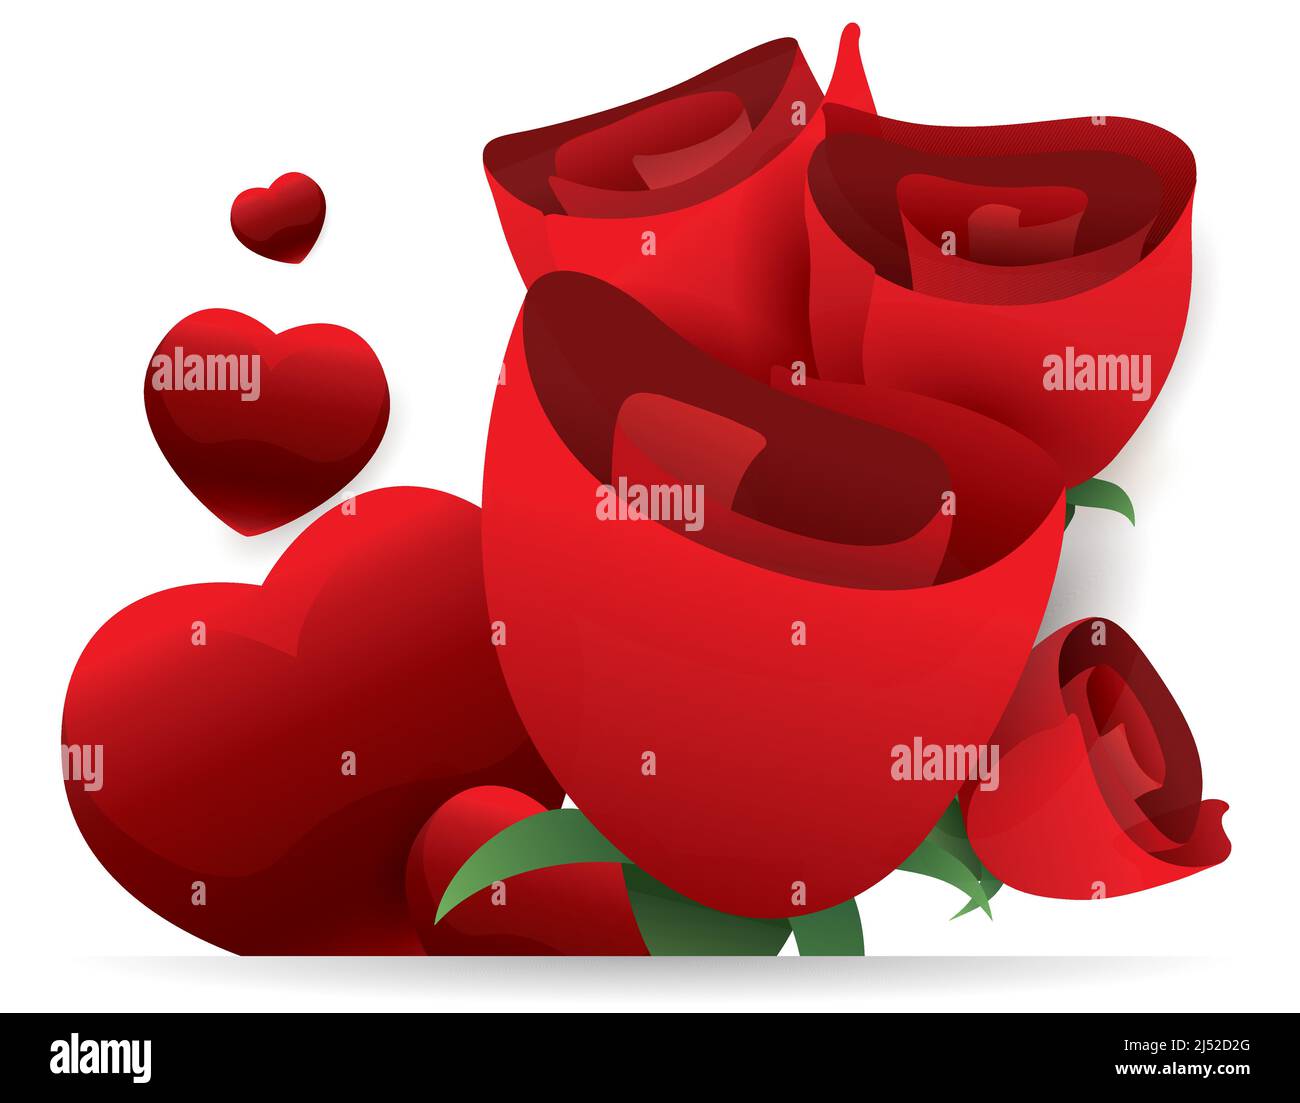 Beautiful bouquet of red roses and floating glossy hearts. Design with gradient effect over white background. Stock Vector